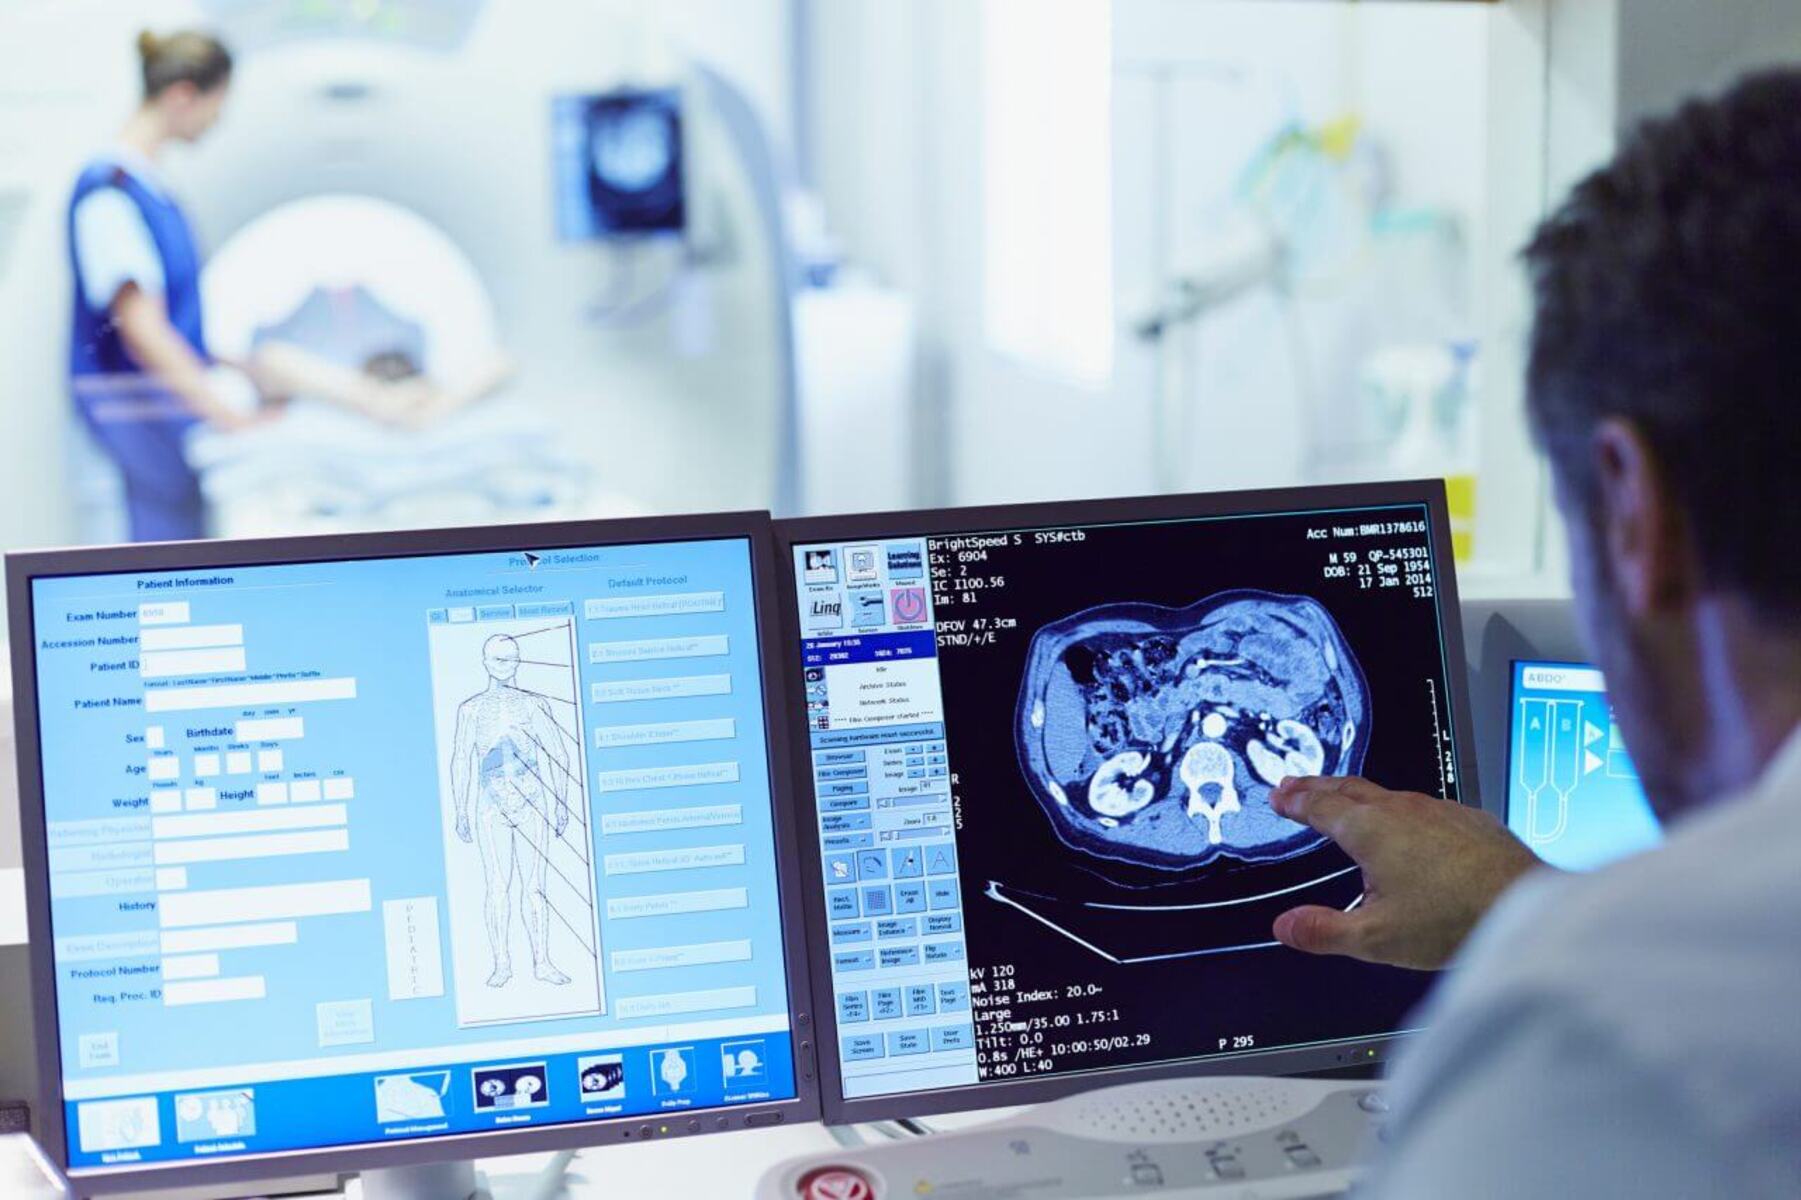 Which Technology Device Could Be Used To View A Patients Internal Organs